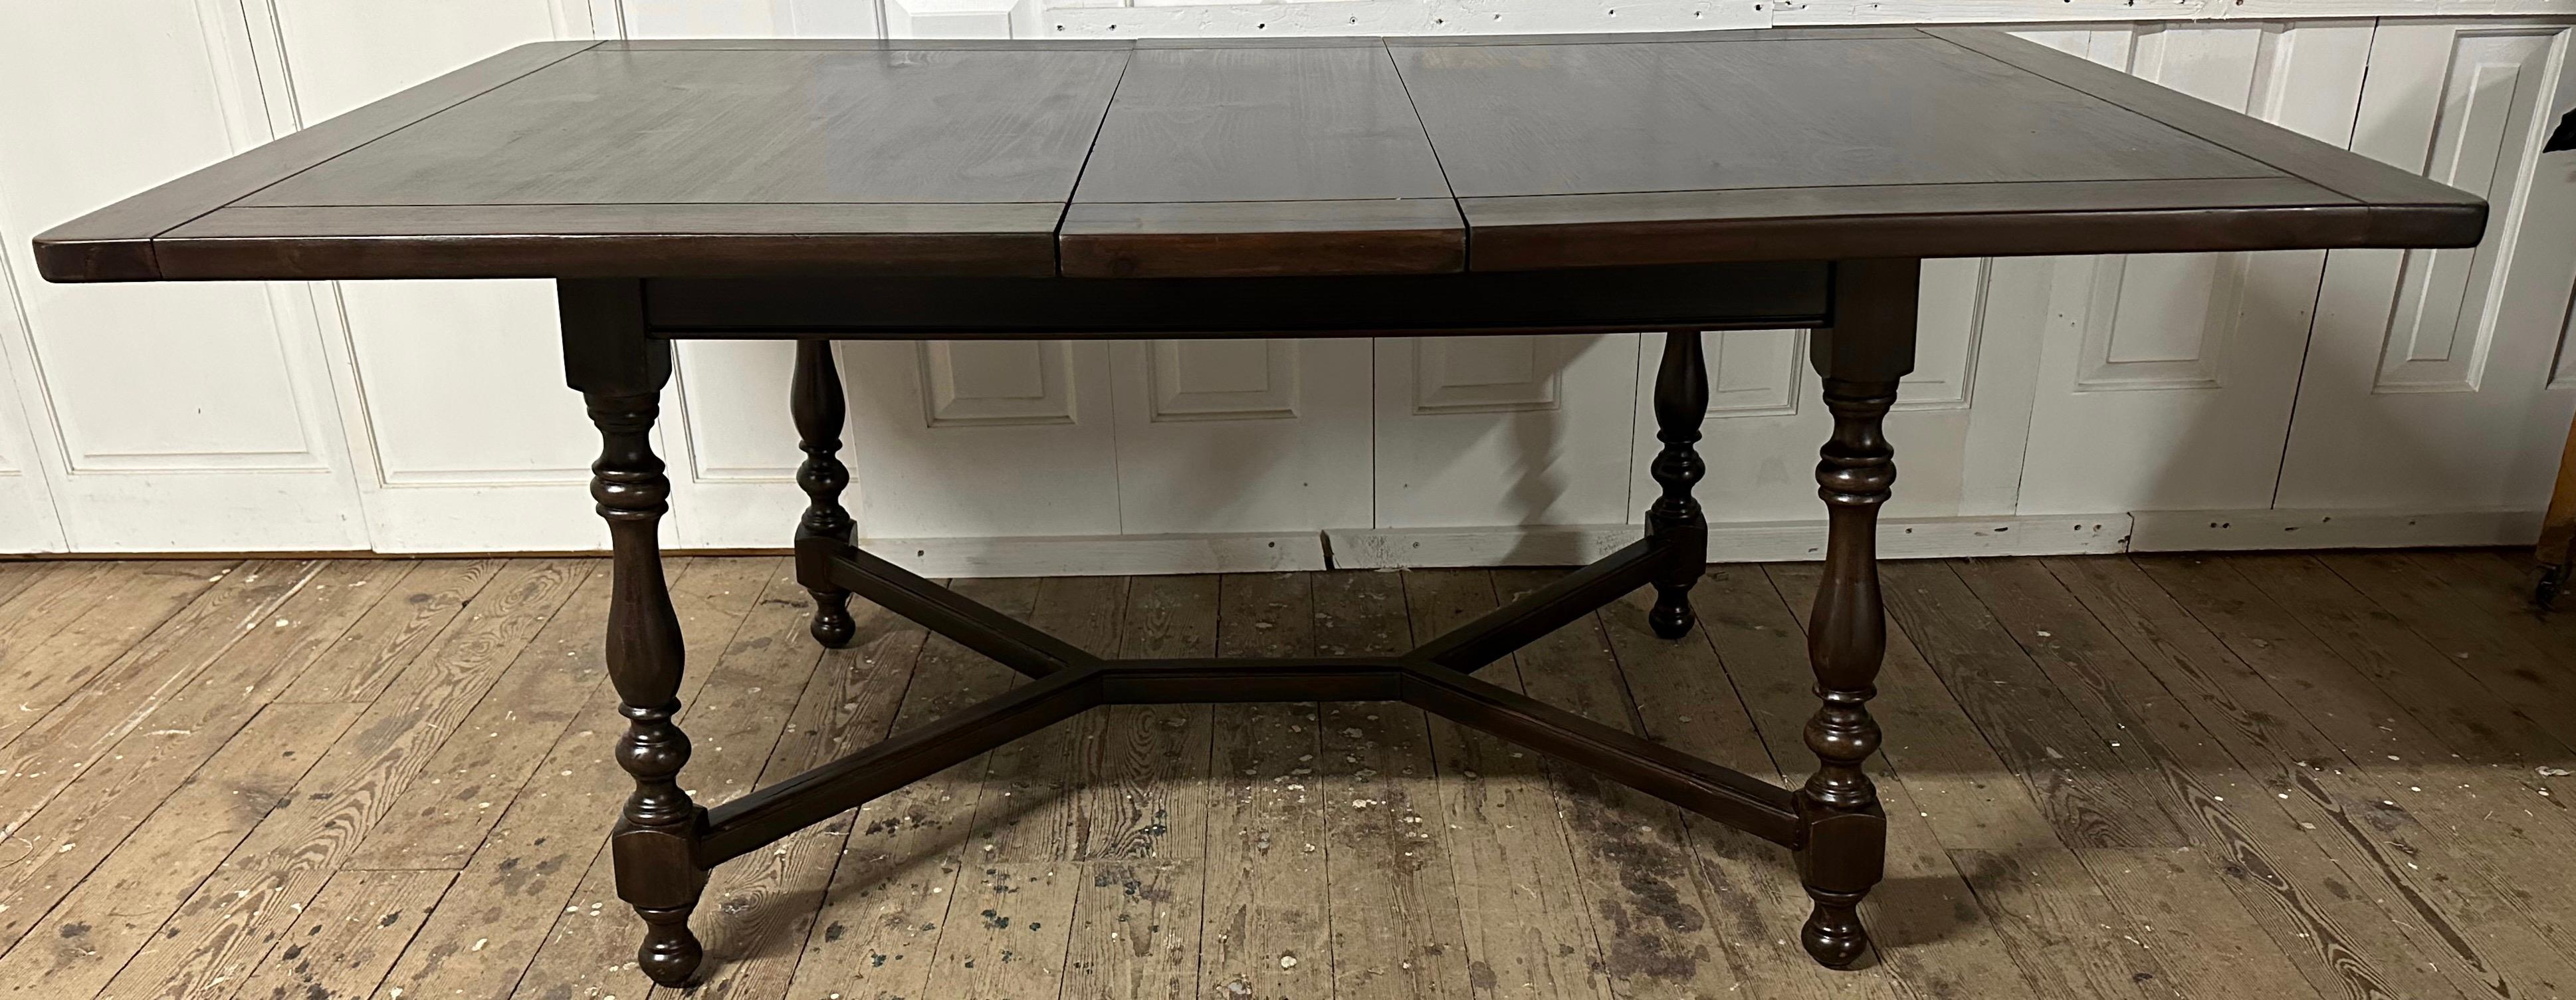 Antique Louis XIII Style Extending Dining Table with Turned Legs For Sale 8